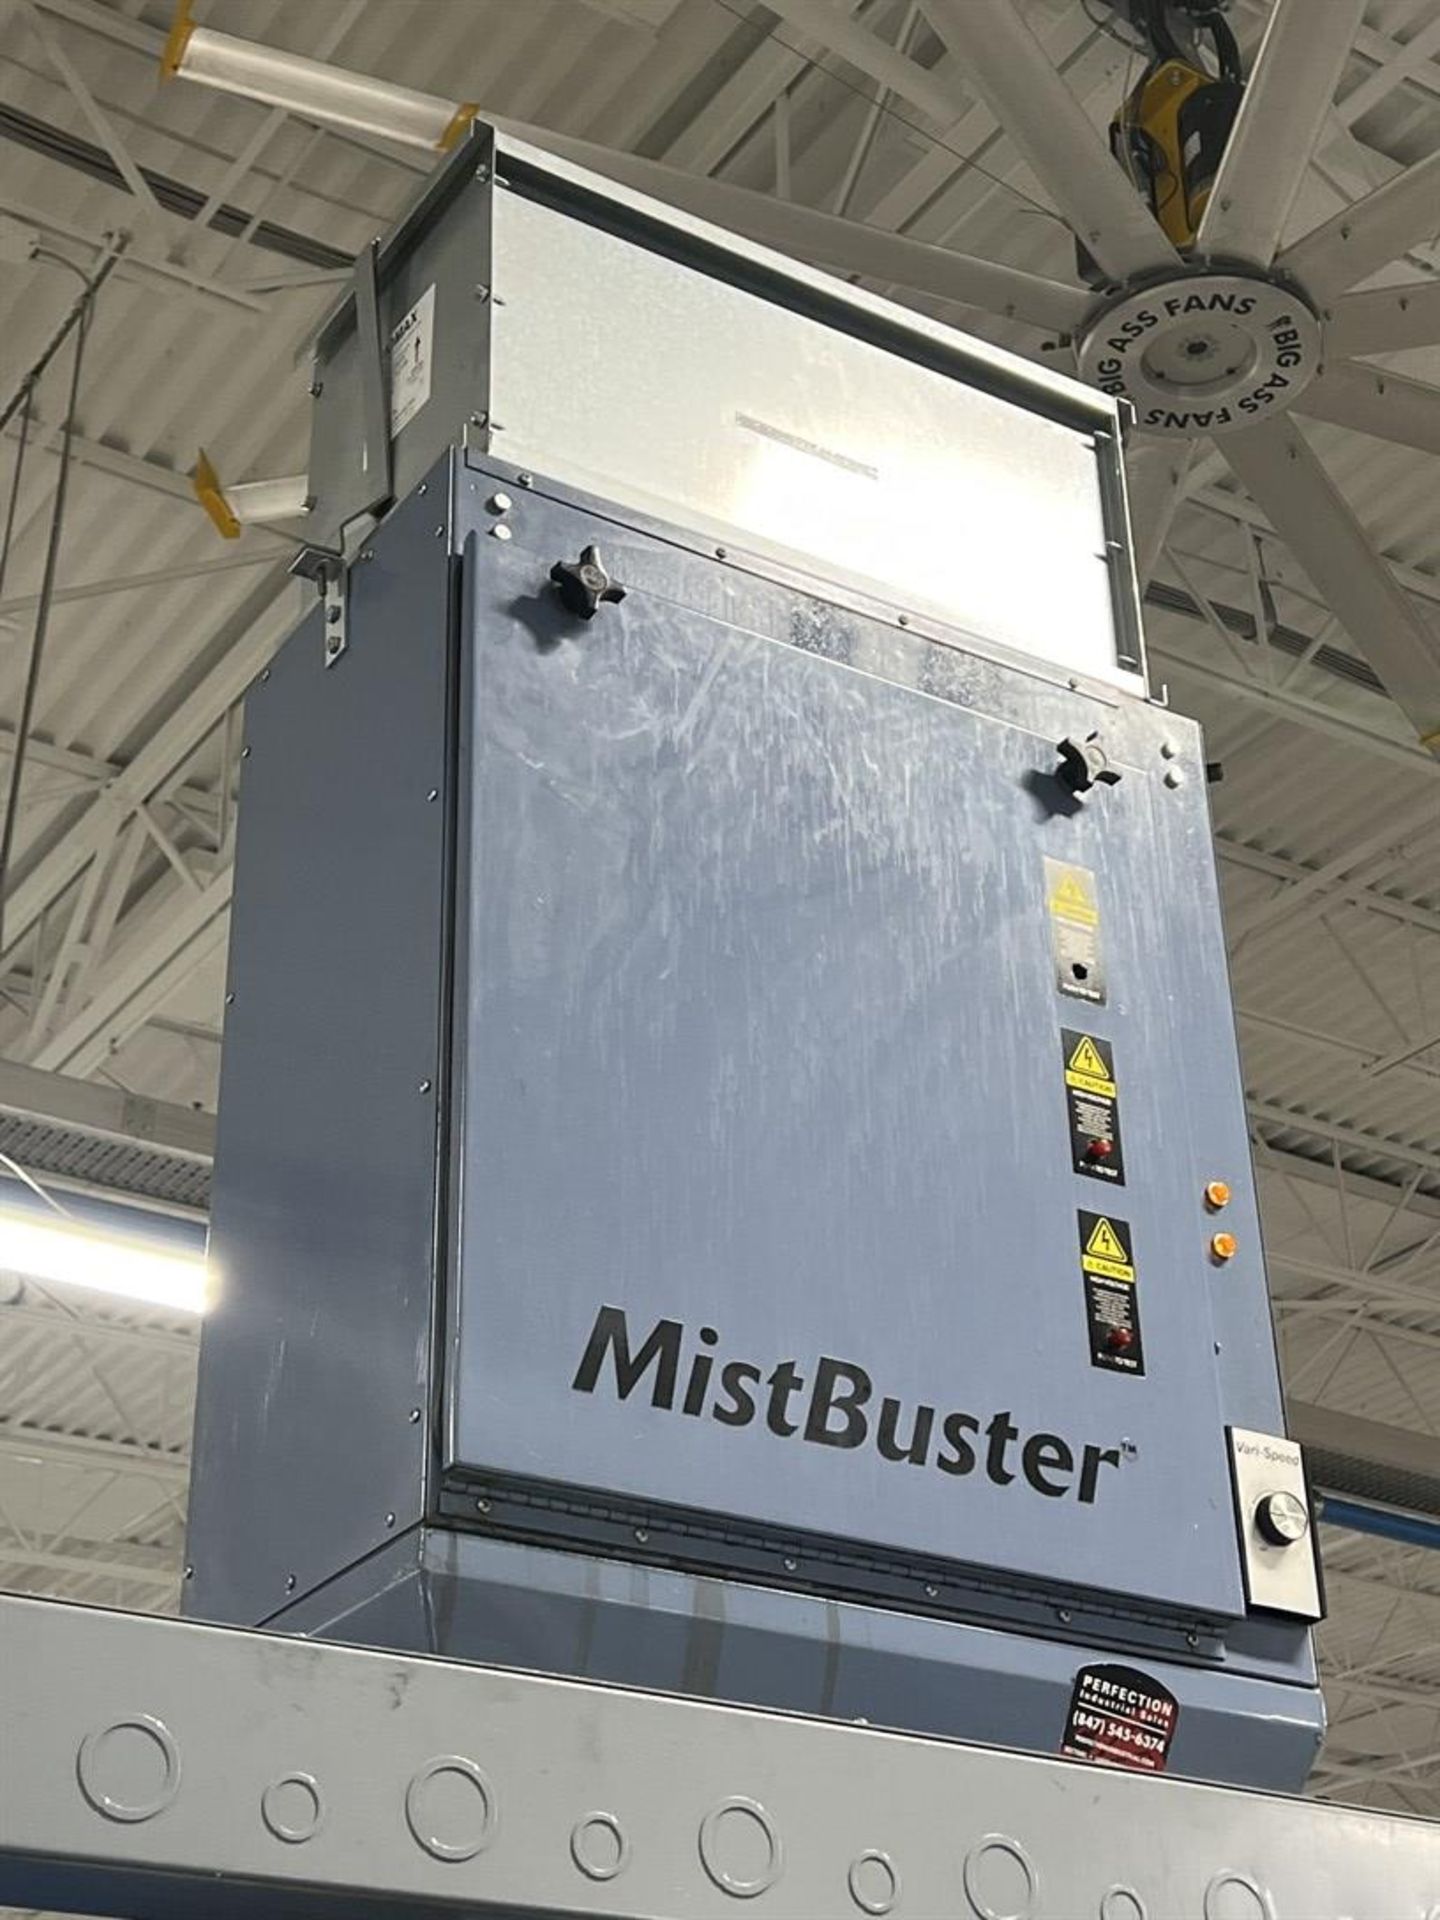 AIR QUALITY ENGINEERING Mistbuster 850 Air Cleaning System